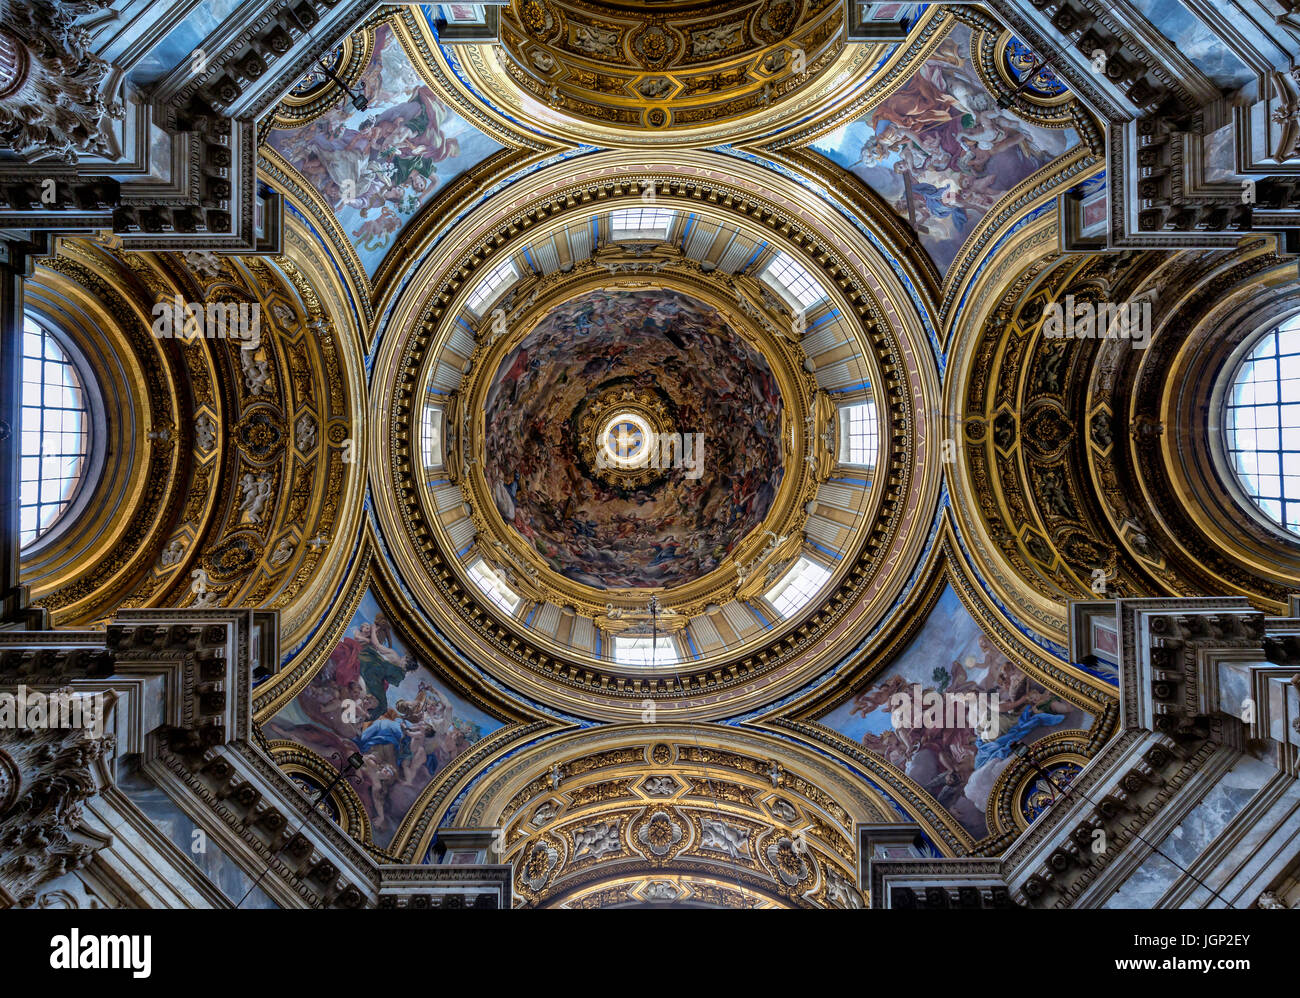 The ceiling of Sant'Agnese in Agone (Sant'Agnese in Piazza Navona), Rome, Lazio, Italy Stock Photo